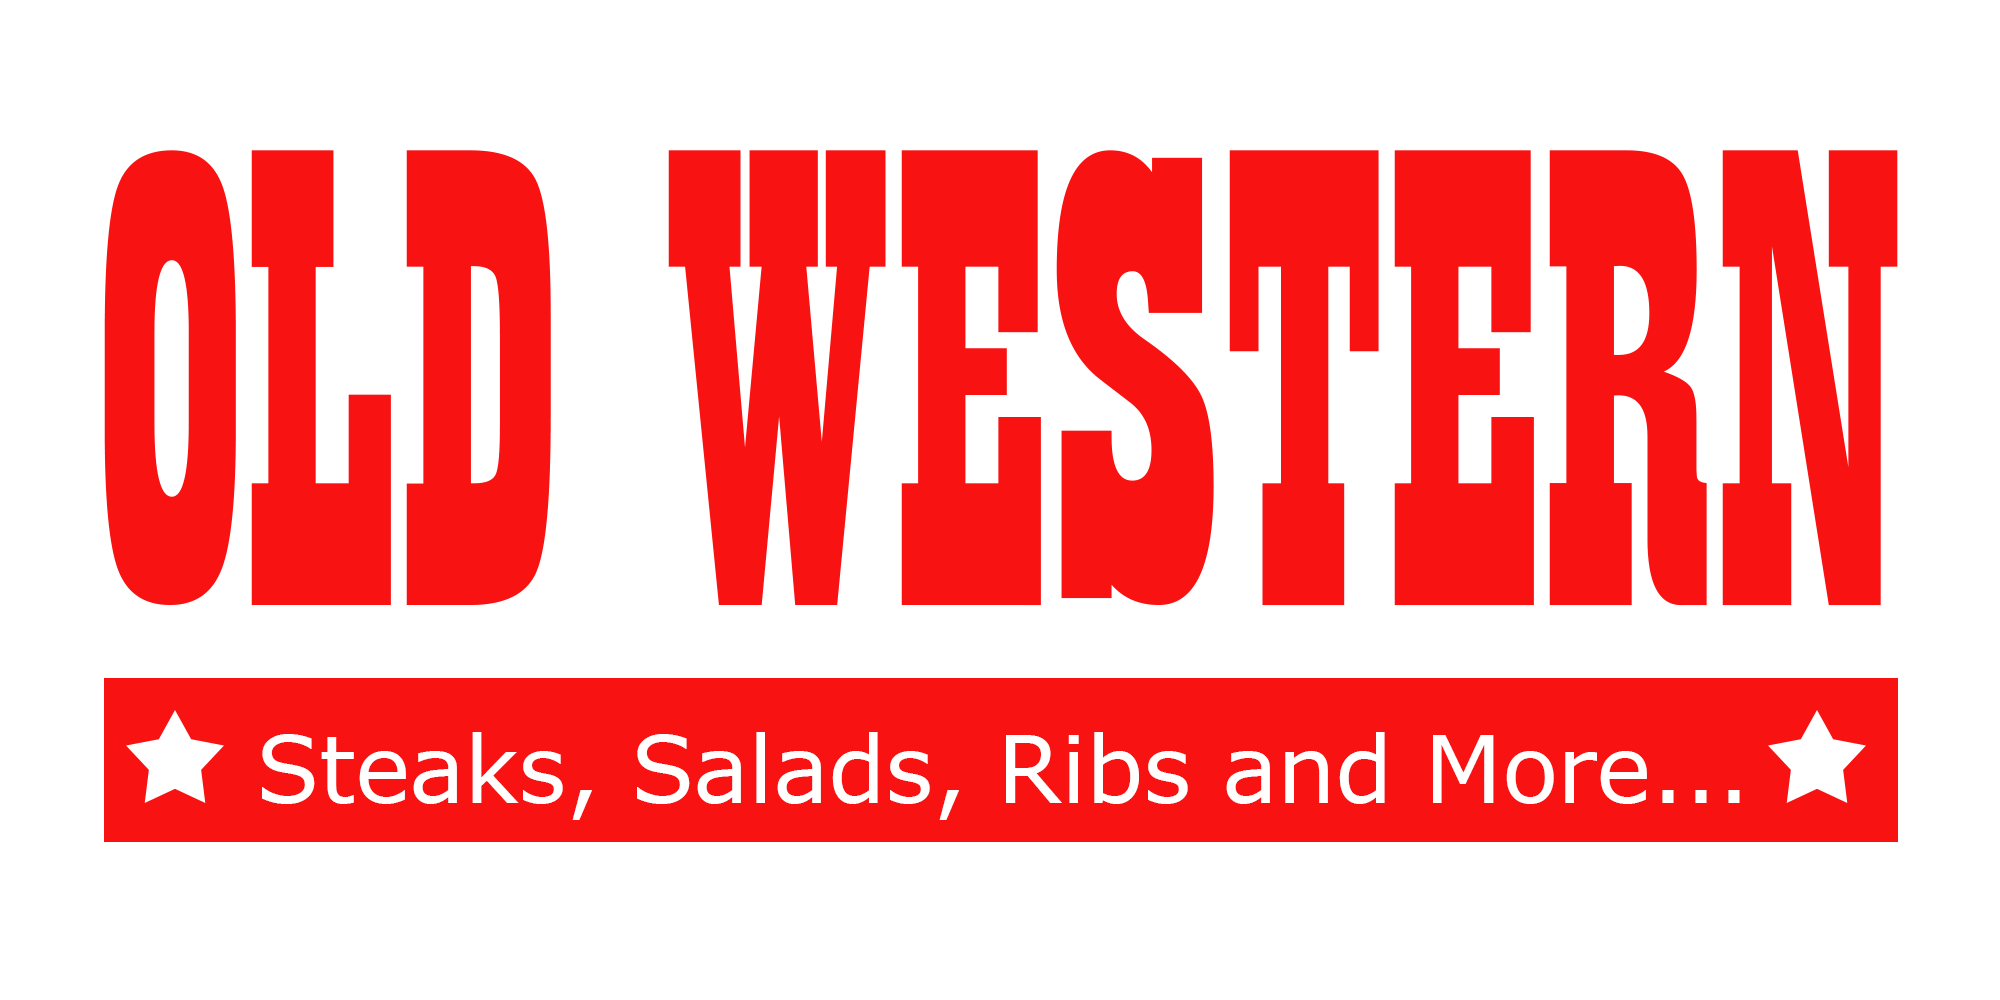 Old Western - Steaks, Salads, Ribs & More in Rostock